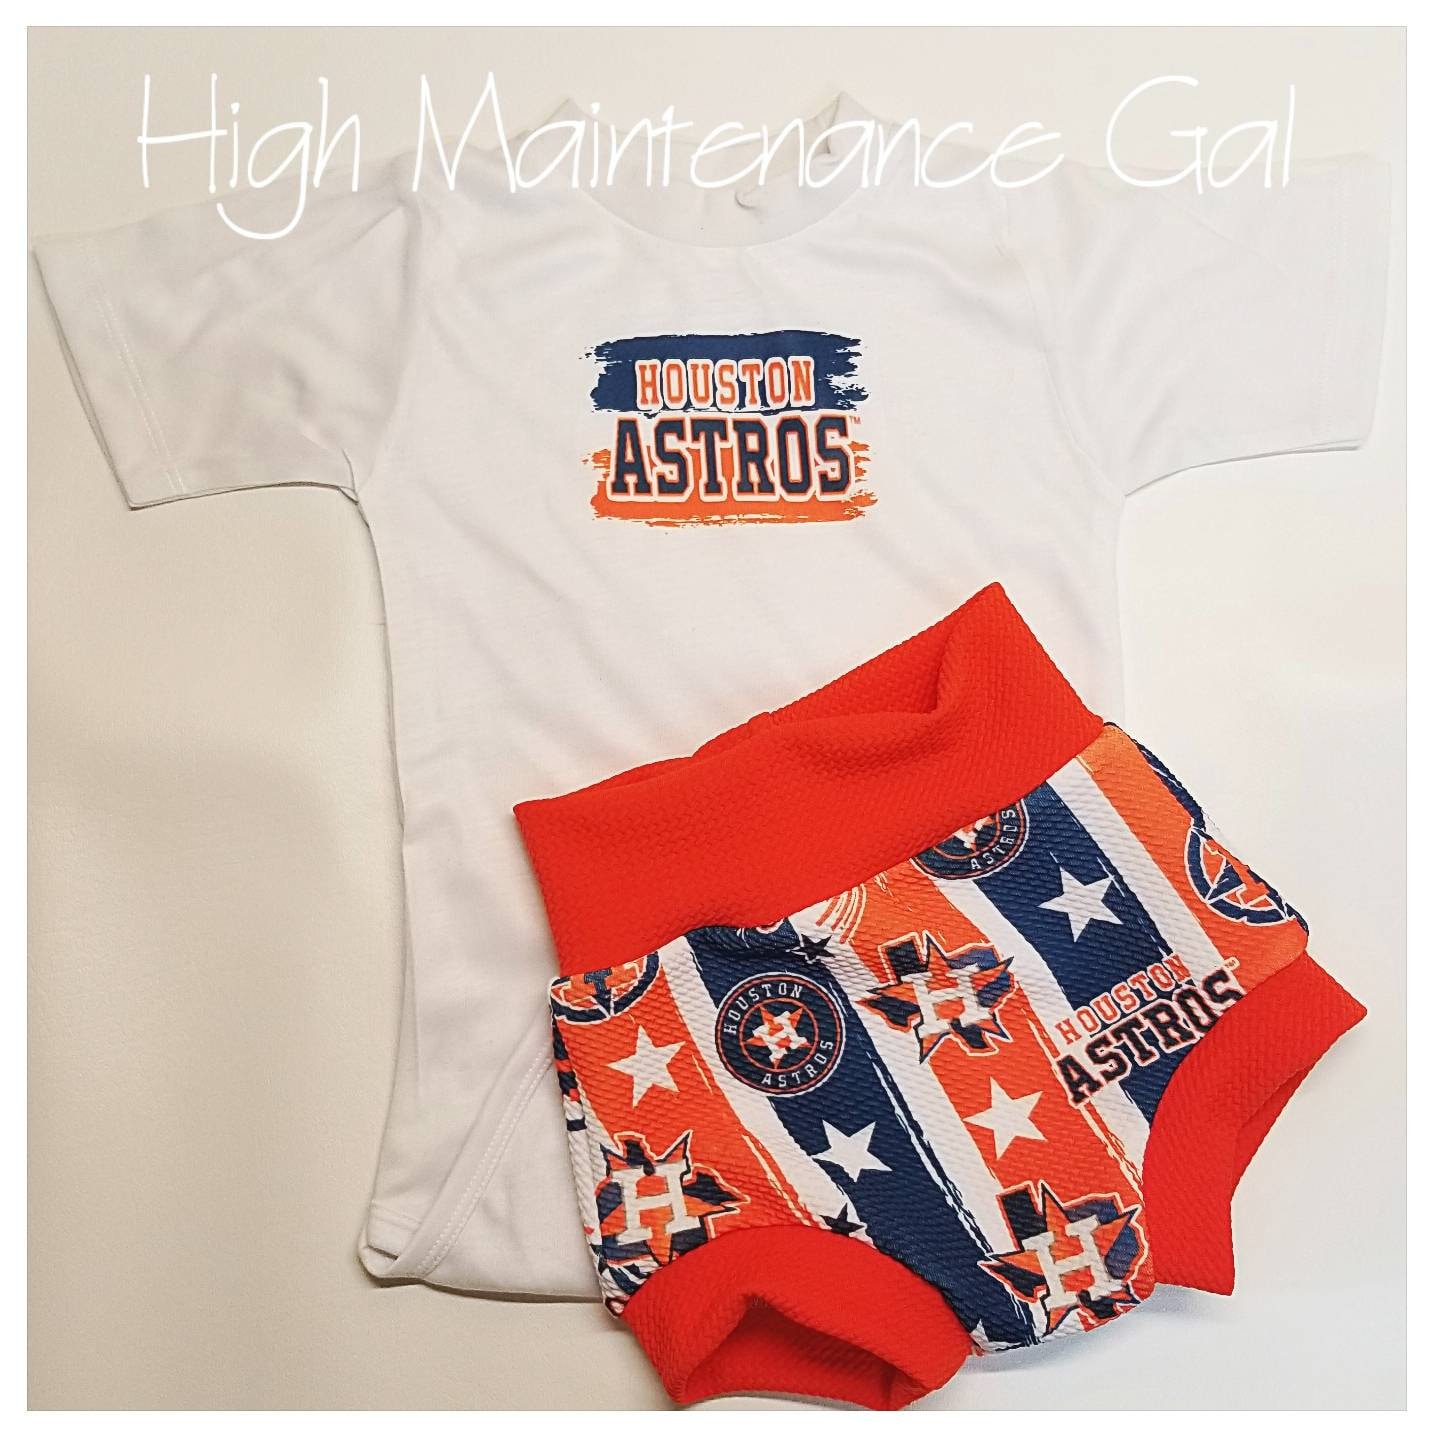 astros jersey outfit girls 2023｜TikTok Search